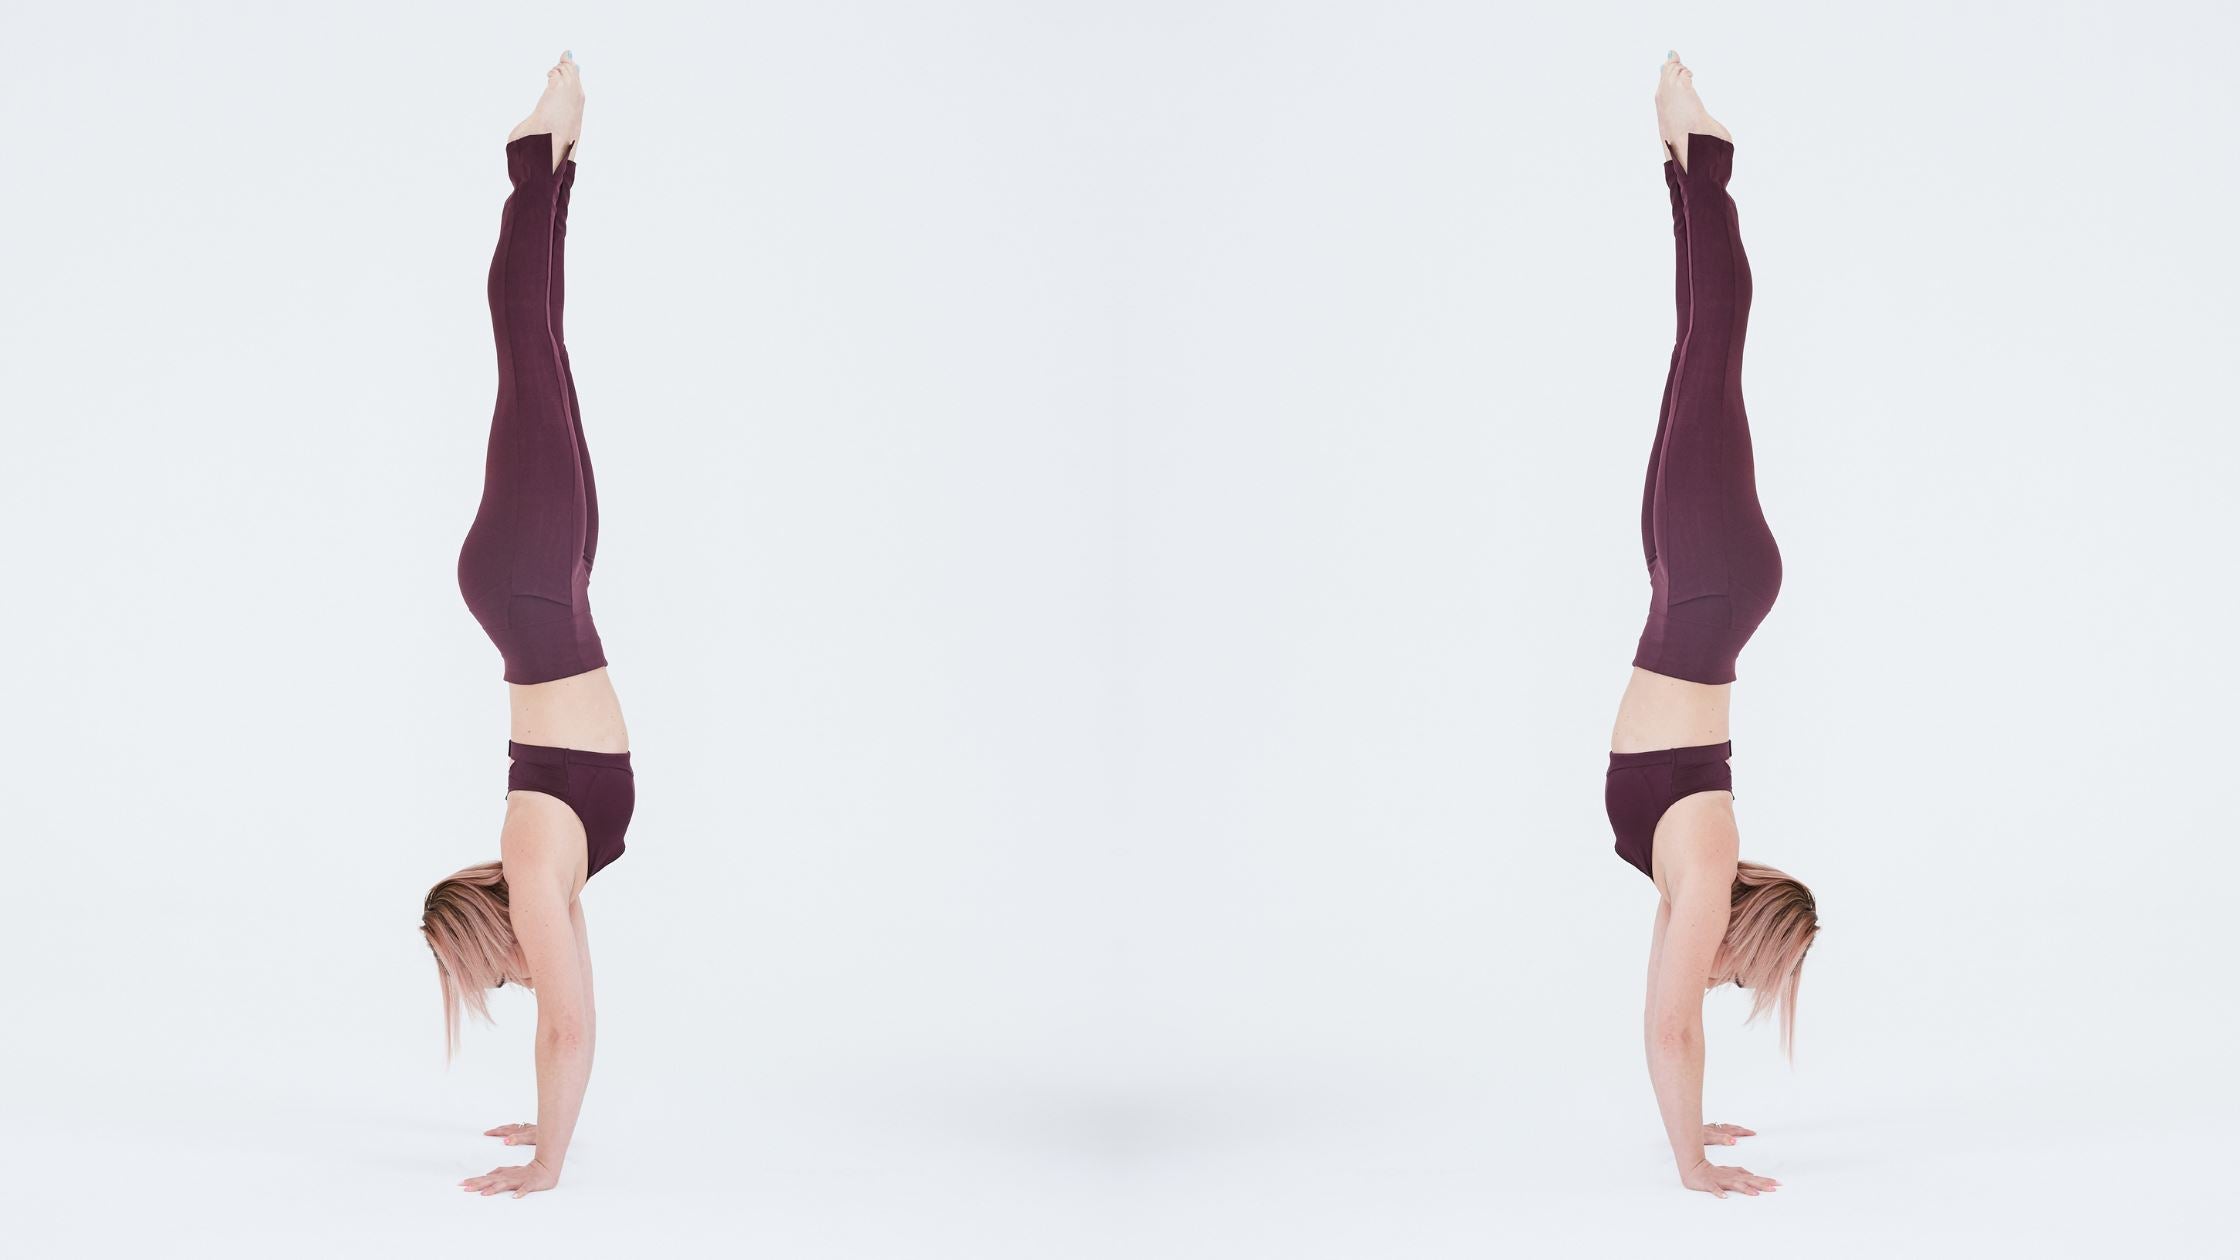 How To Do A Yoga Handstand Step By Step Beginners Guide